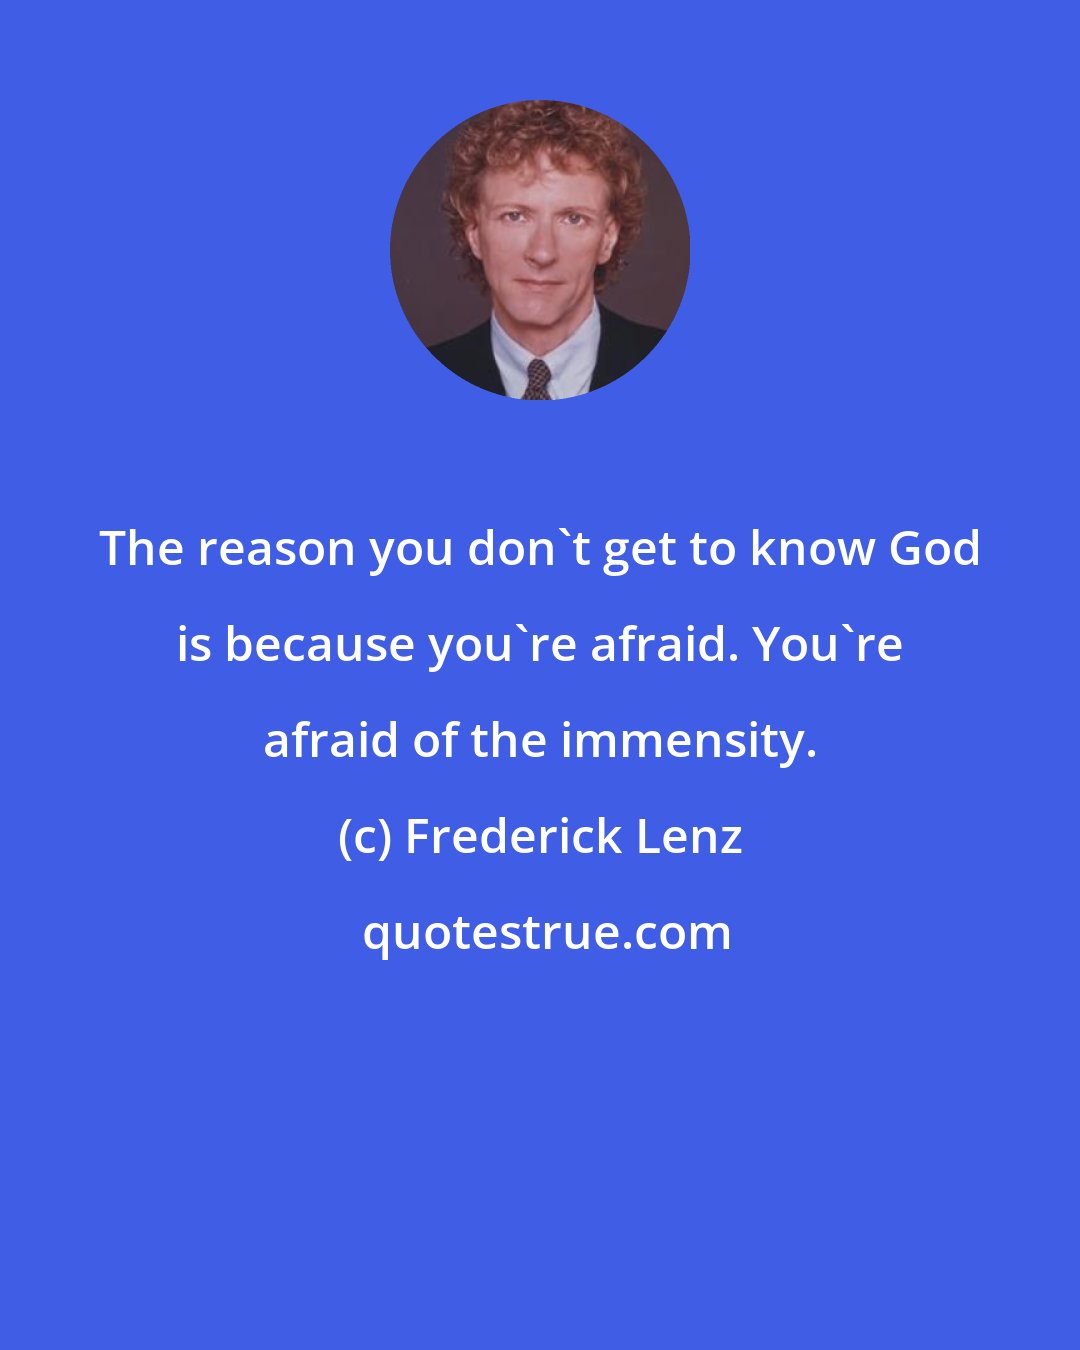 Frederick Lenz: The reason you don't get to know God is because you're afraid. You're afraid of the immensity.